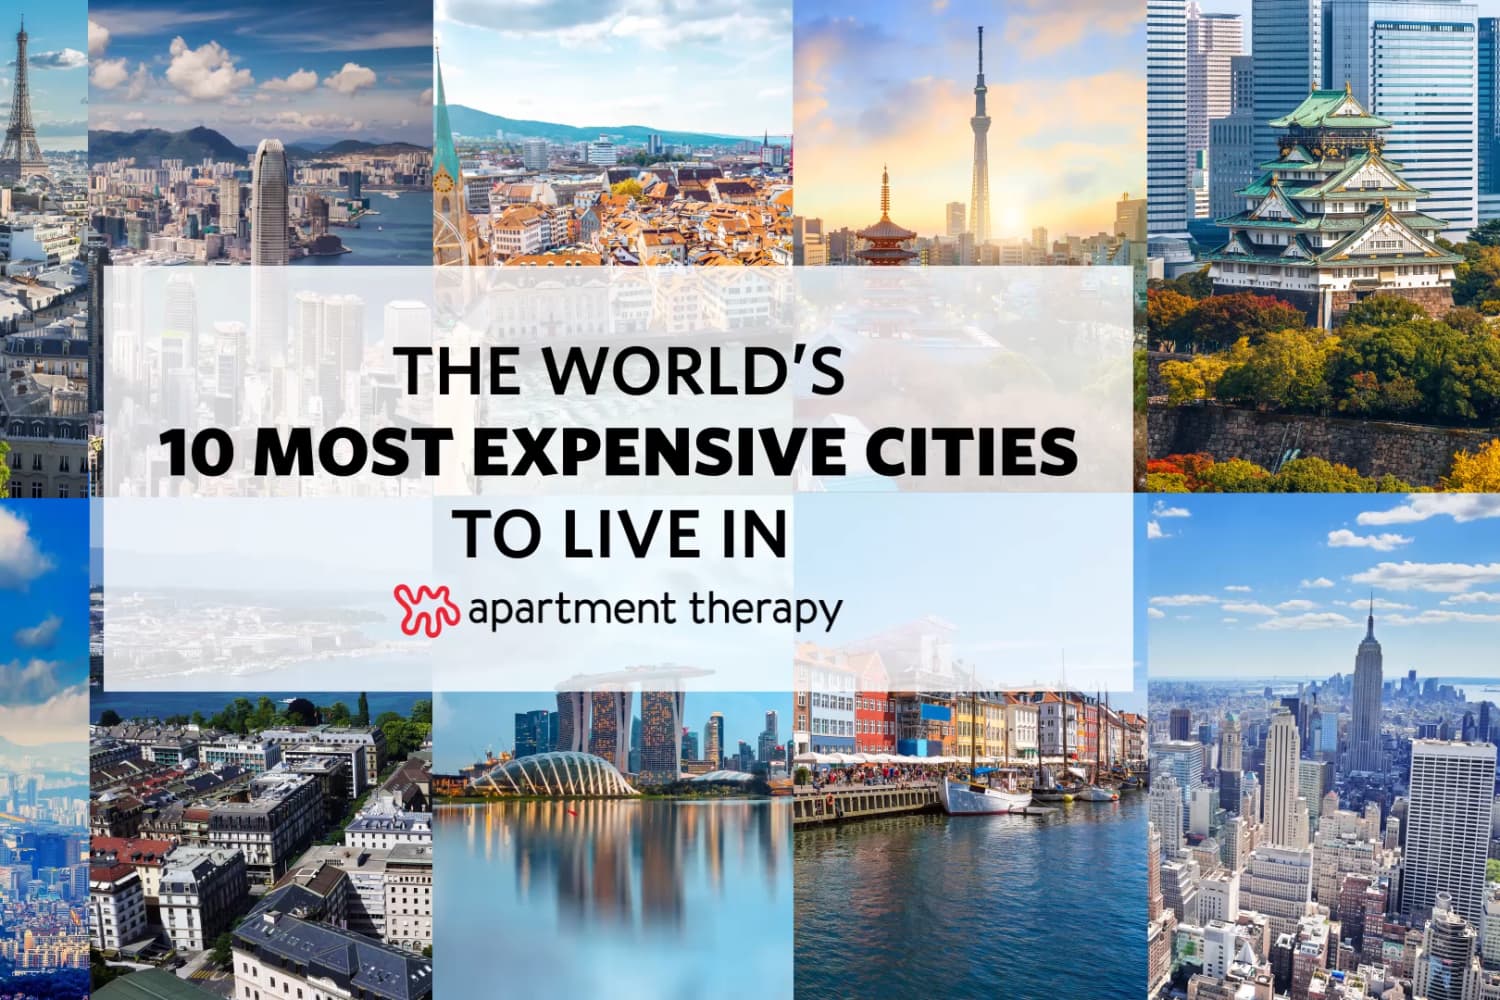 These Are the World’s 10 Most Expensive Cities to Live in Apartment